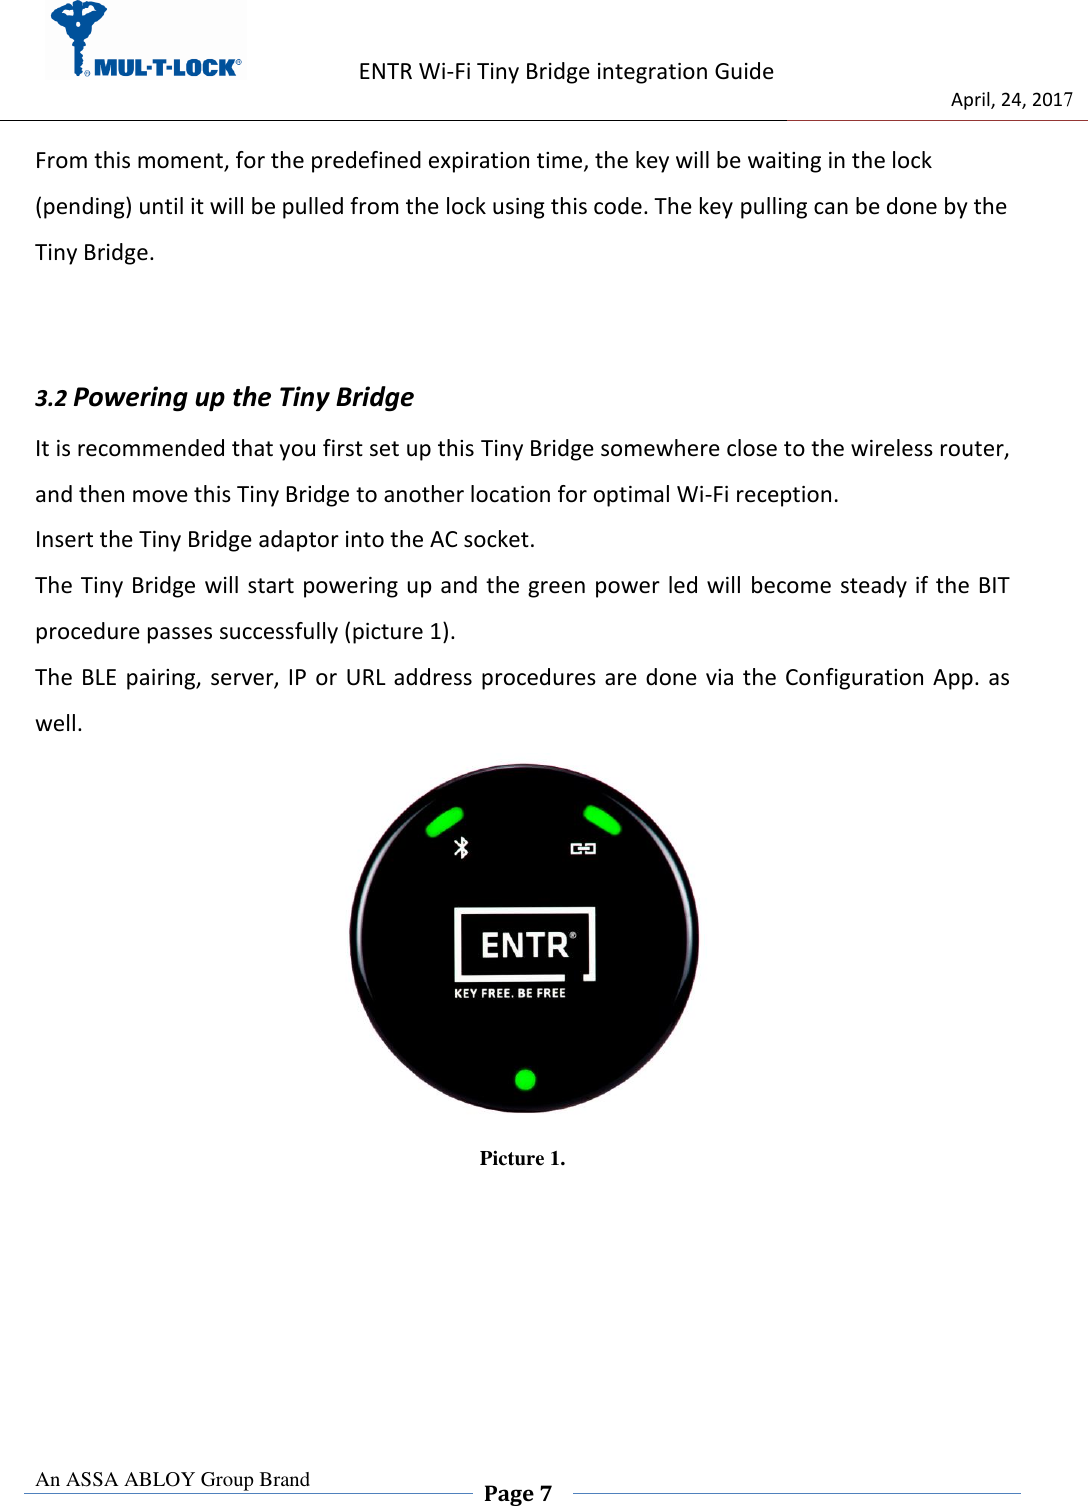                   ENTR Wi-Fi Tiny Bridge integration Guide     de                                 April, 24, 2017  An ASSA ABLOY Group Brand  Page 7    From this moment, for the predefined expiration time, the key will be waiting in the lock (pending) until it will be pulled from the lock using this code. The key pulling can be done by the Tiny Bridge.   3.2 Powering up the Tiny Bridge It is recommended that you first set up this Tiny Bridge somewhere close to the wireless router, and then move this Tiny Bridge to another location for optimal Wi-Fi reception. Insert the Tiny Bridge adaptor into the AC socket. The Tiny Bridge will start powering up and the green power led will  become steady if the BIT procedure passes successfully (picture 1). The BLE pairing, server, IP or URL address procedures are done via the  Configuration App. as well.  Picture 1.      